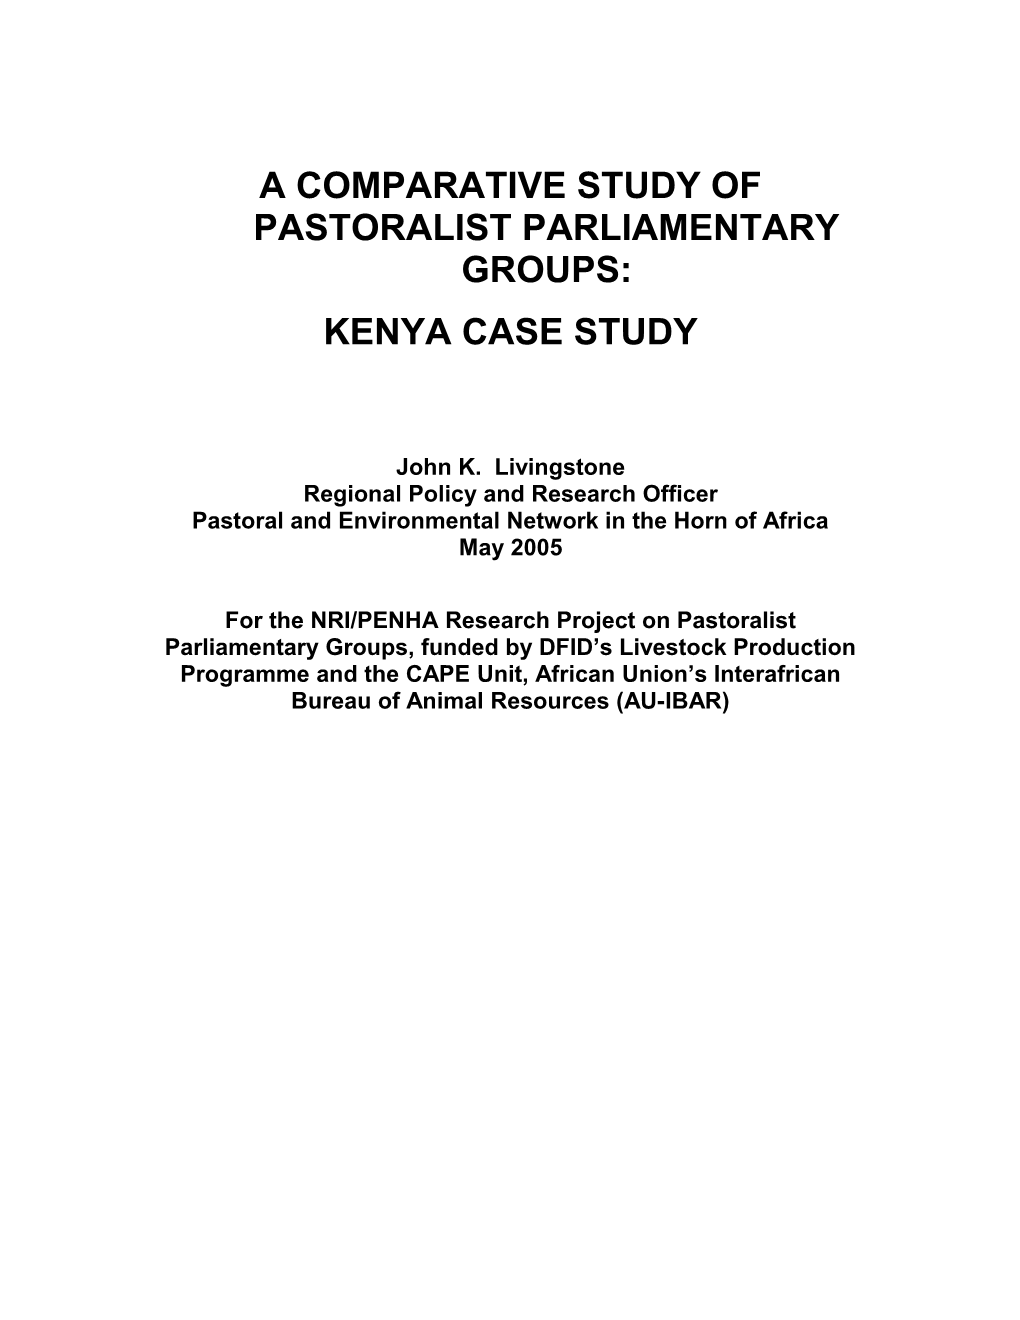 A Comparative Study Of Pastoralist Parliamentary Groups: Kenya Case Study